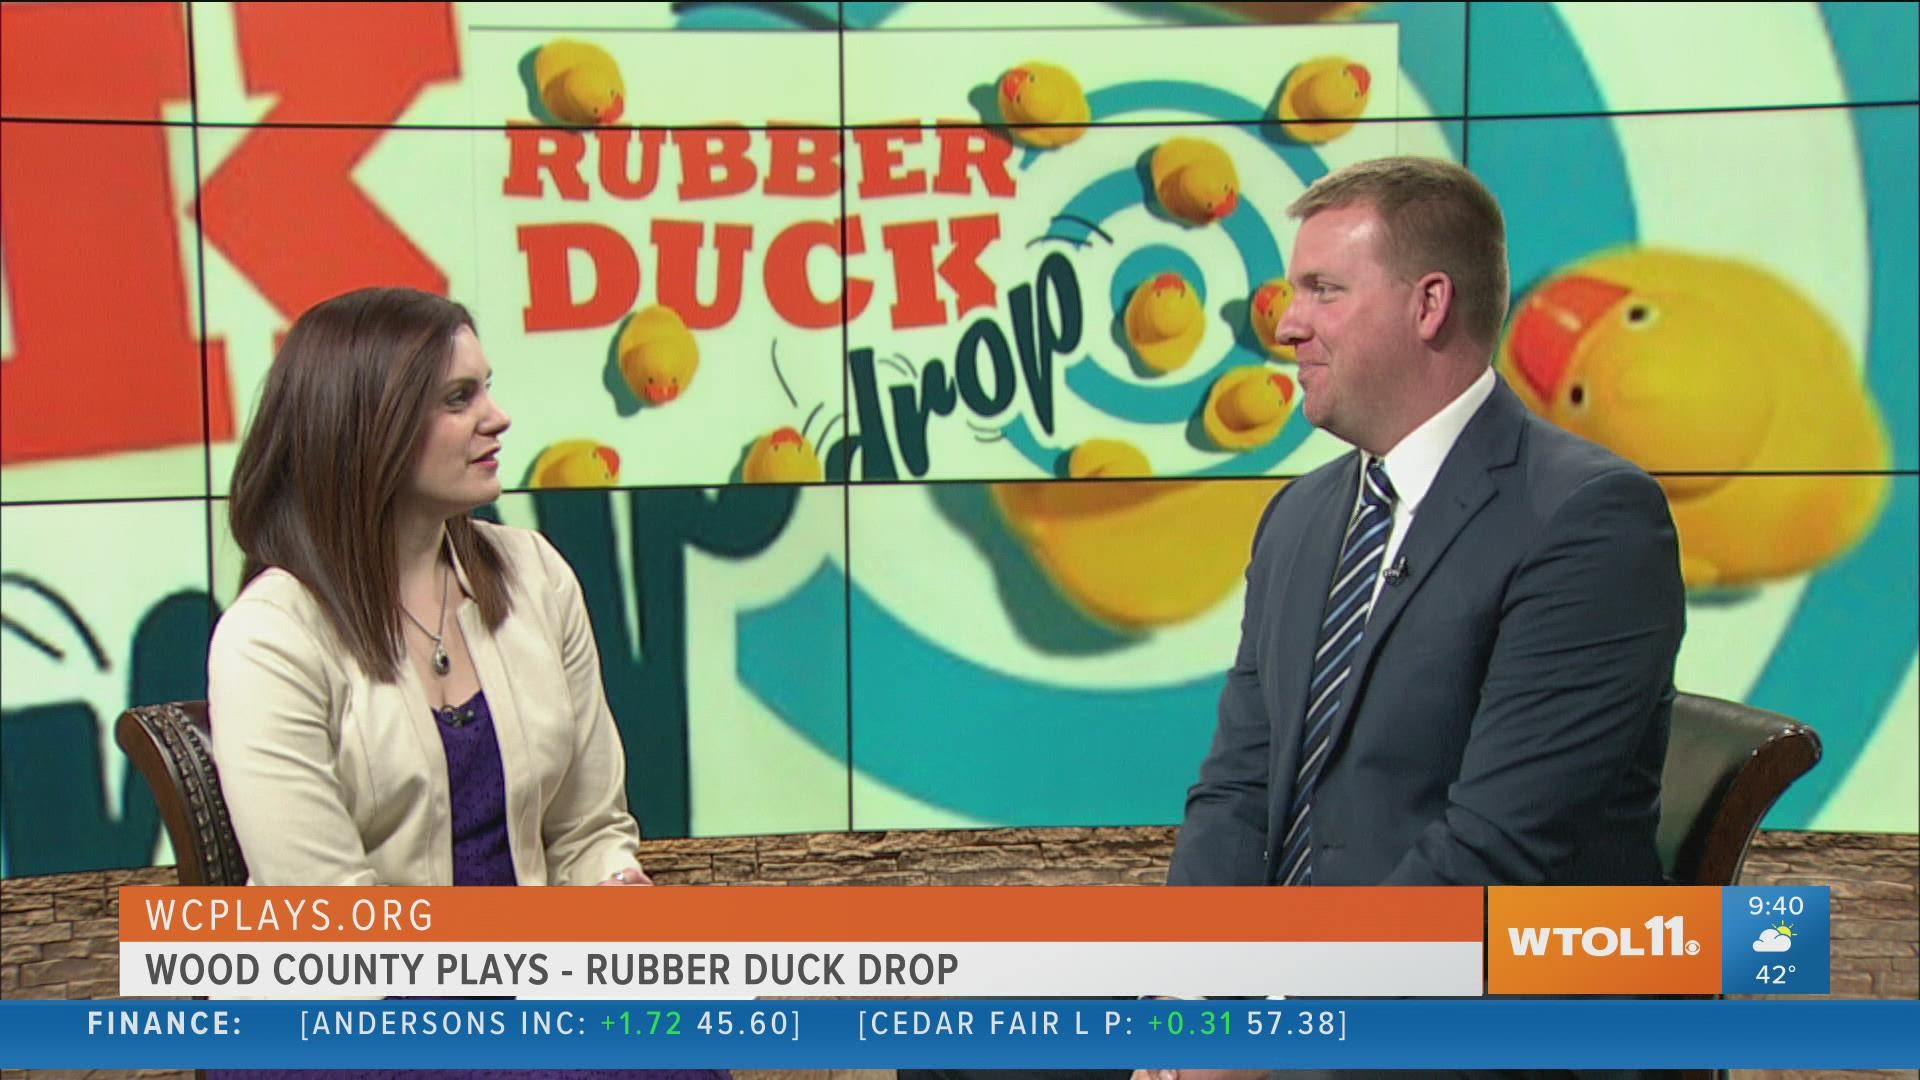 Ryan Wichman shares more about the Rubber Duck Drop